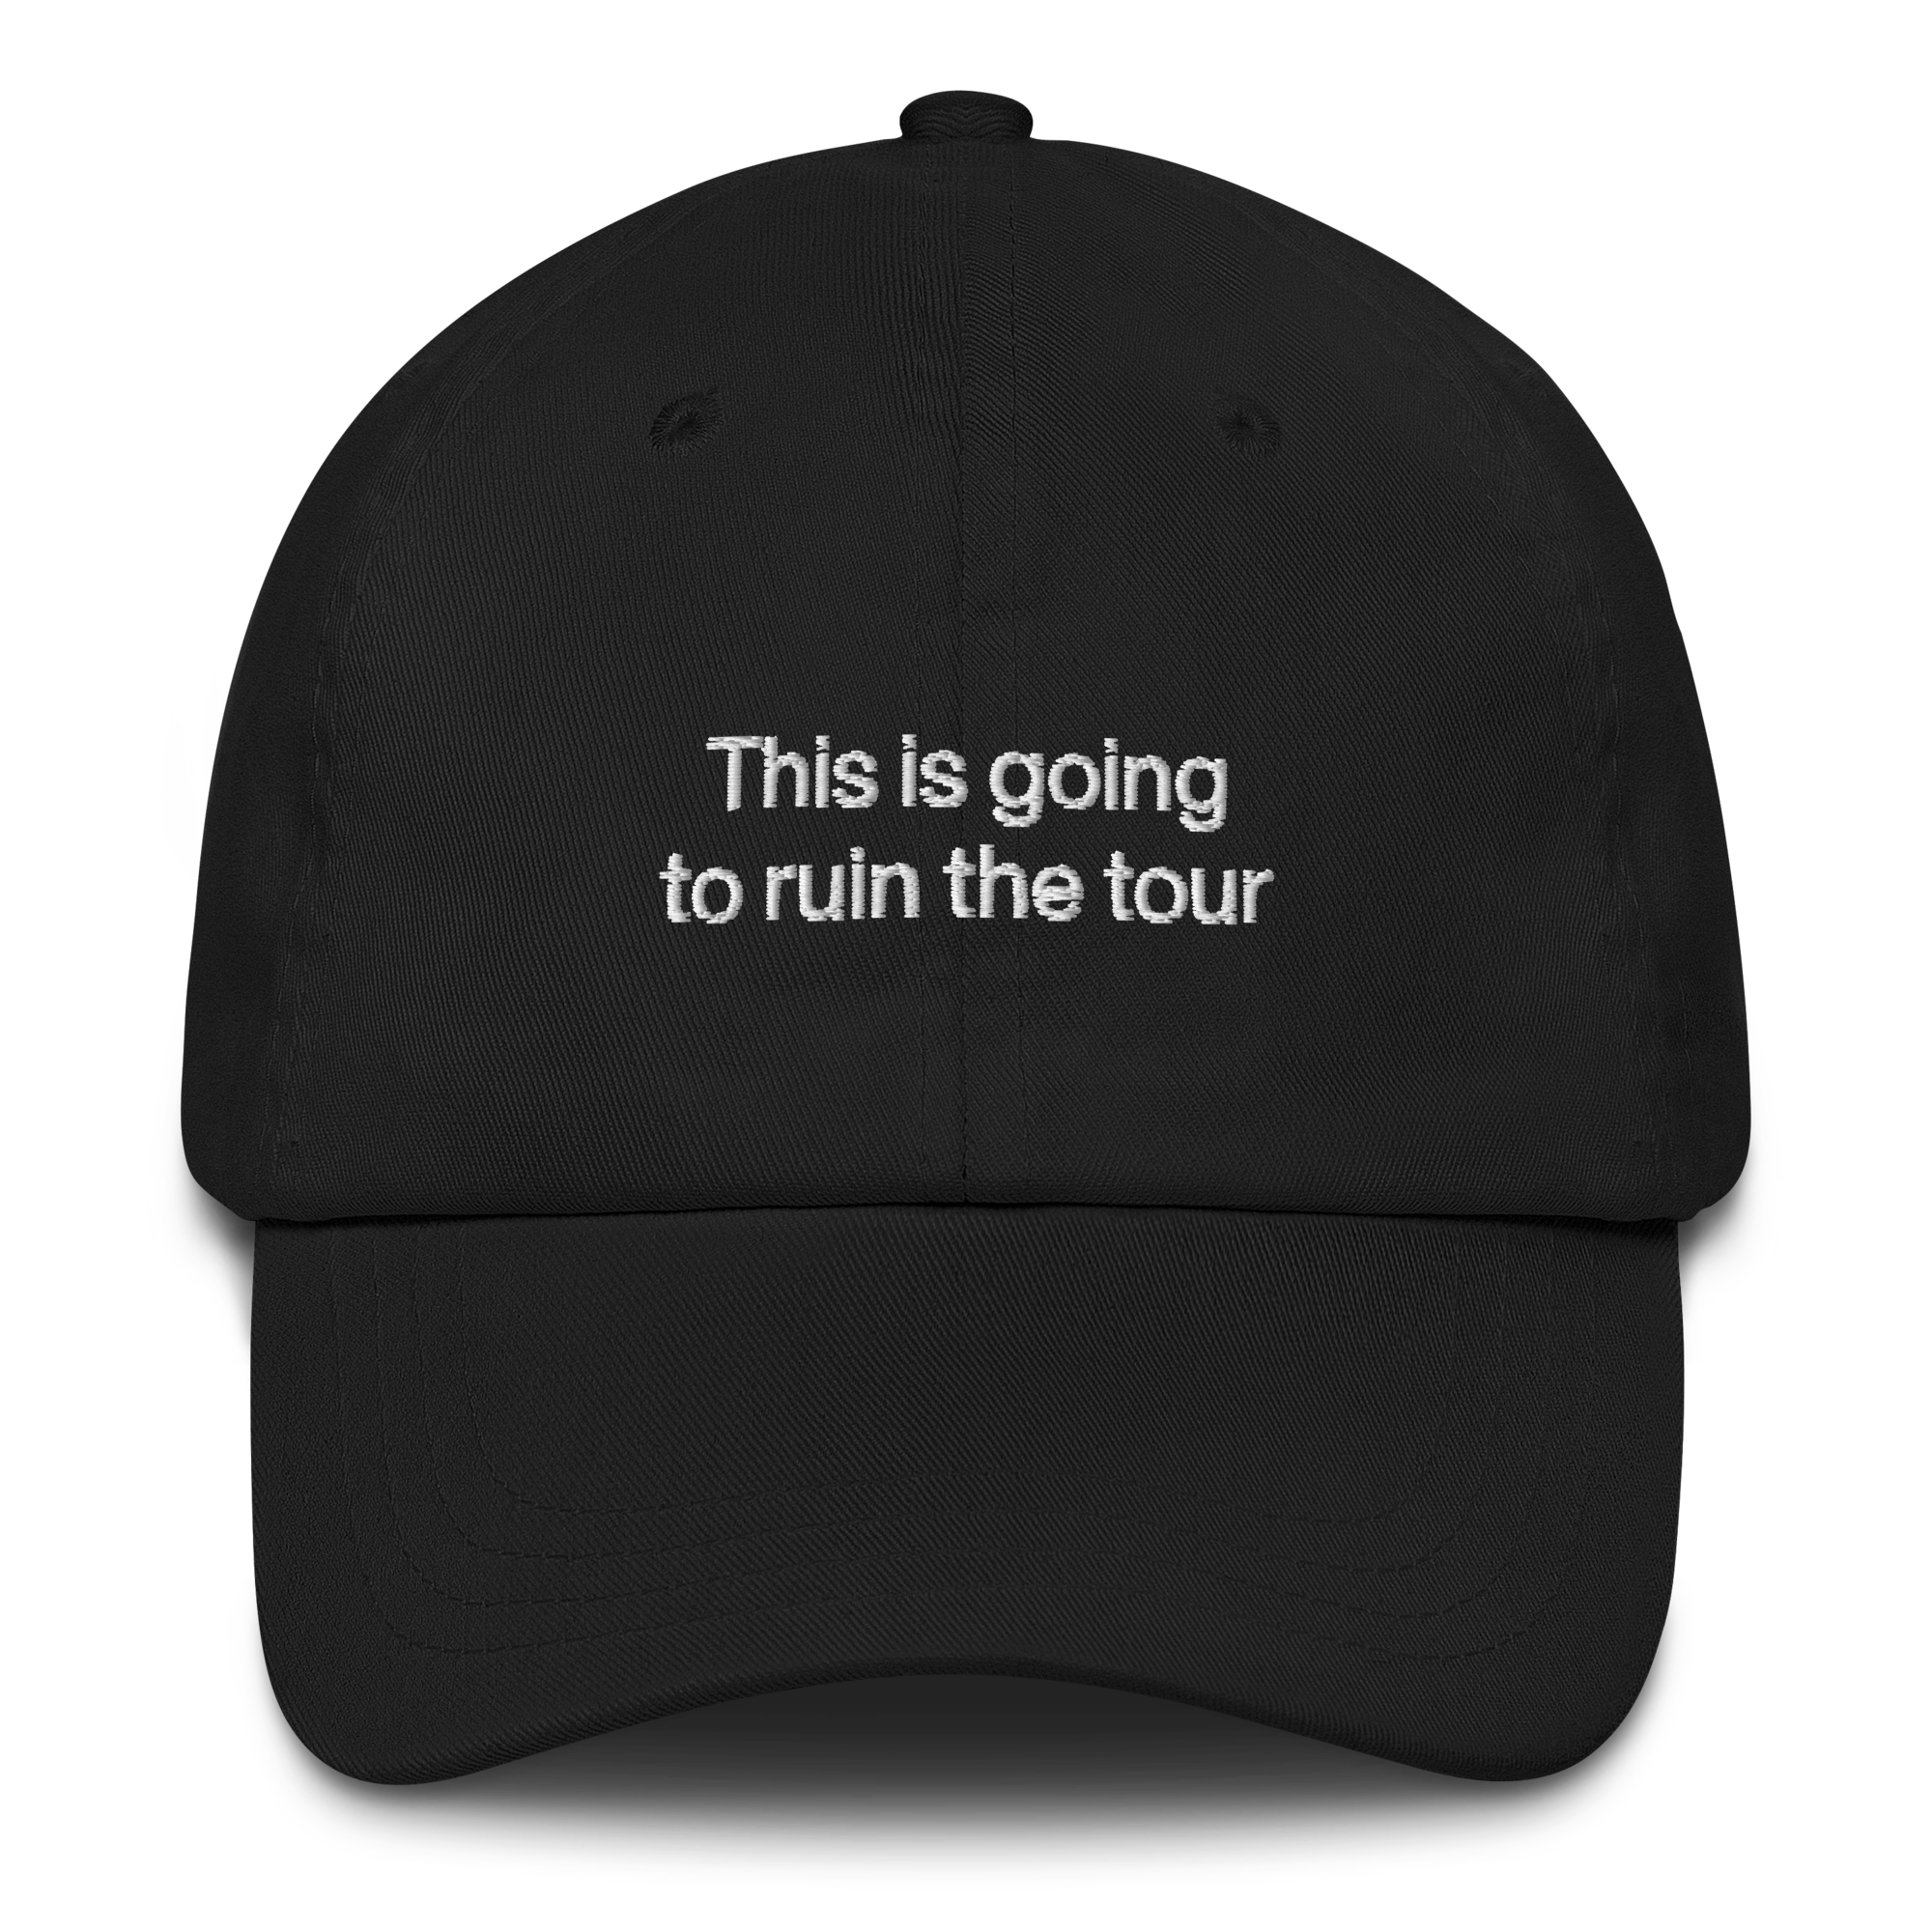 classic-dad-hat-black-front-667597a09b762.png